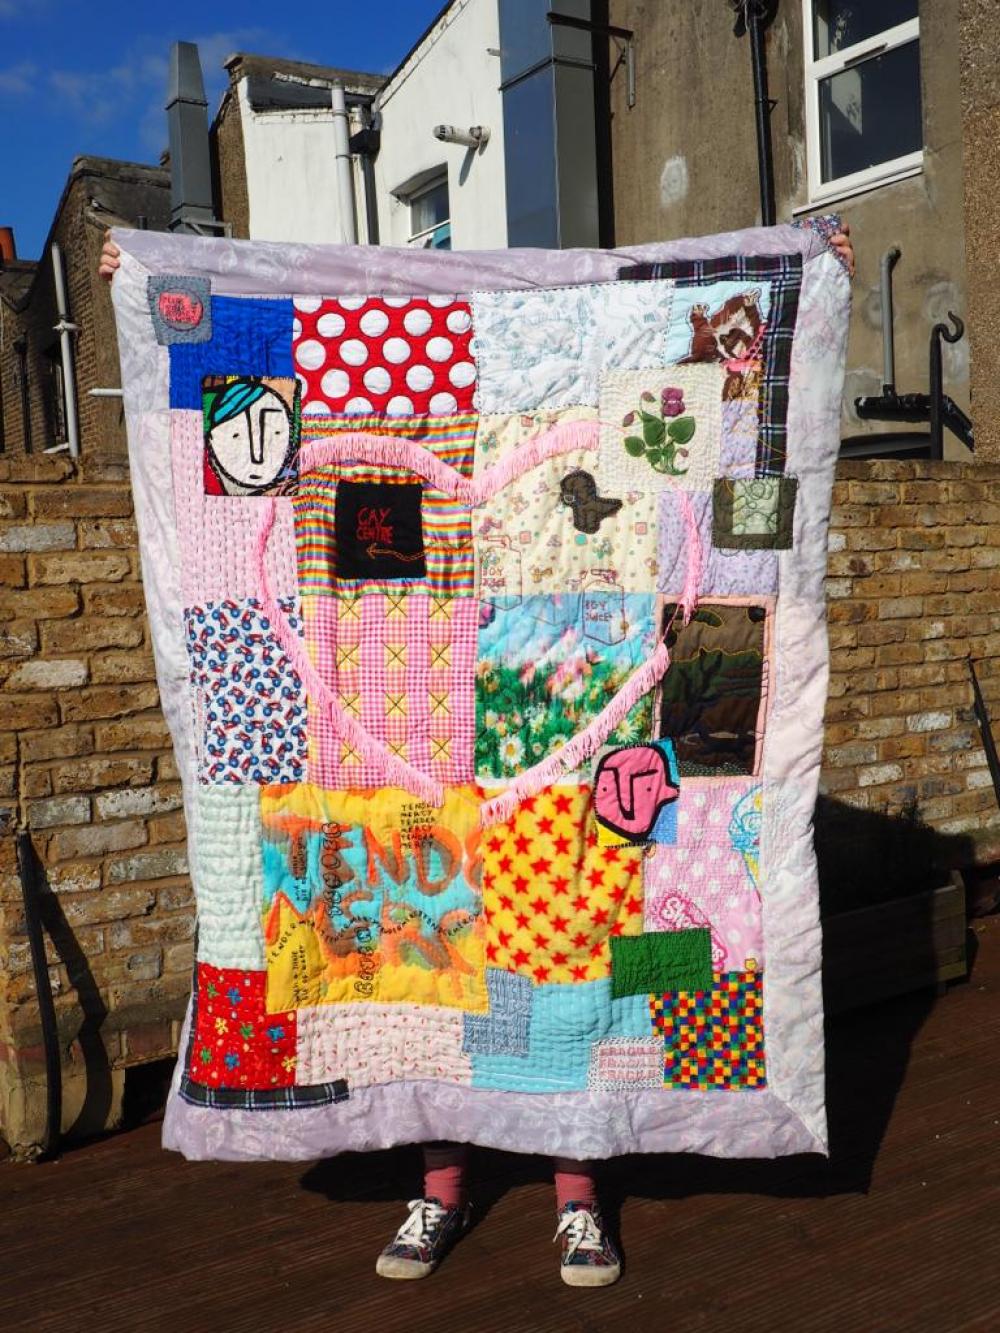 Colourful quilt artwork held up against blue sky and houses.